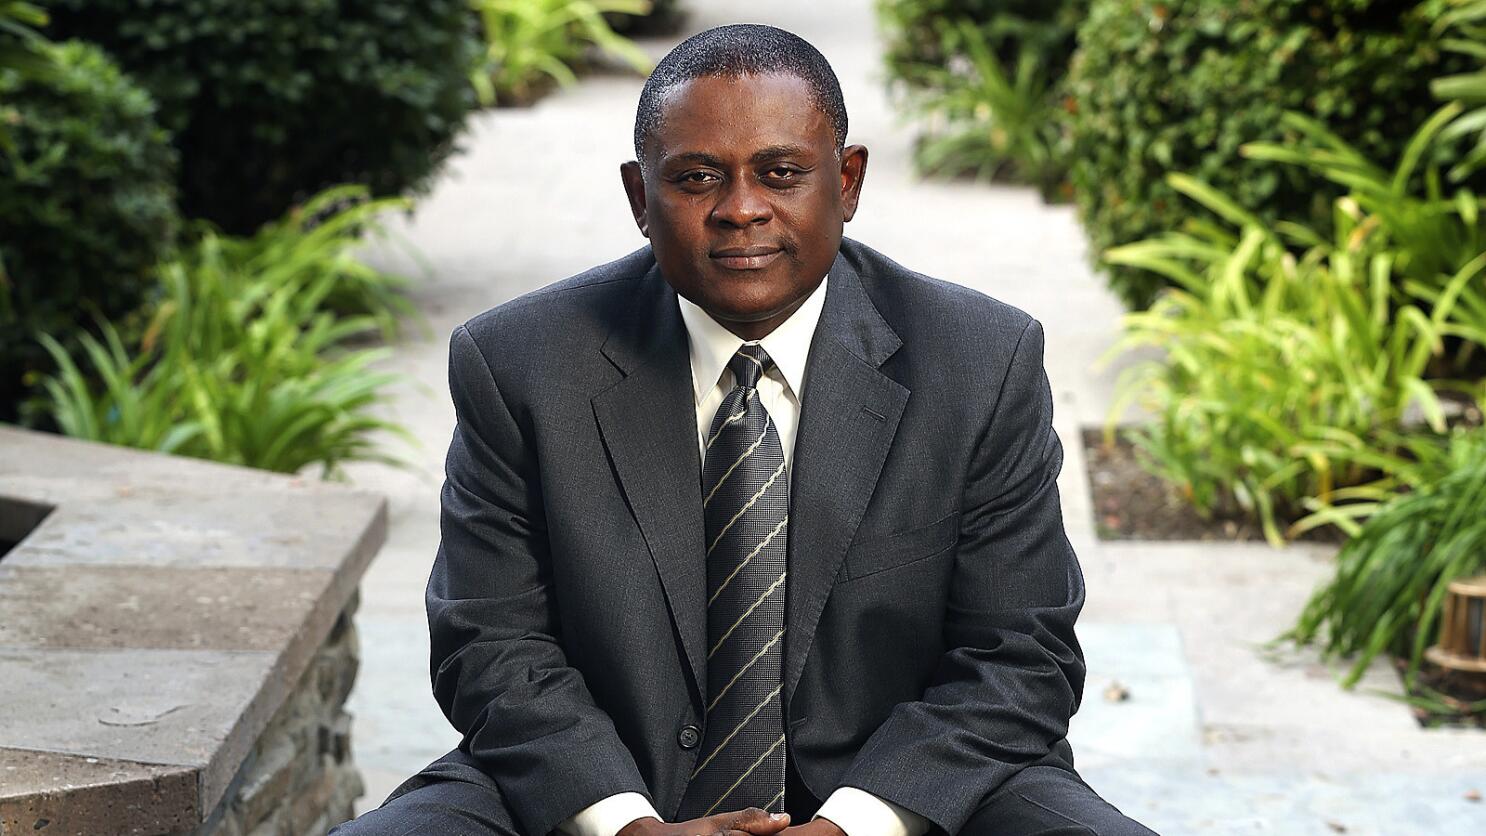 Dr. Bennett Omalu at 55: Celebrating one of Nigeria’s greatest exports to the world